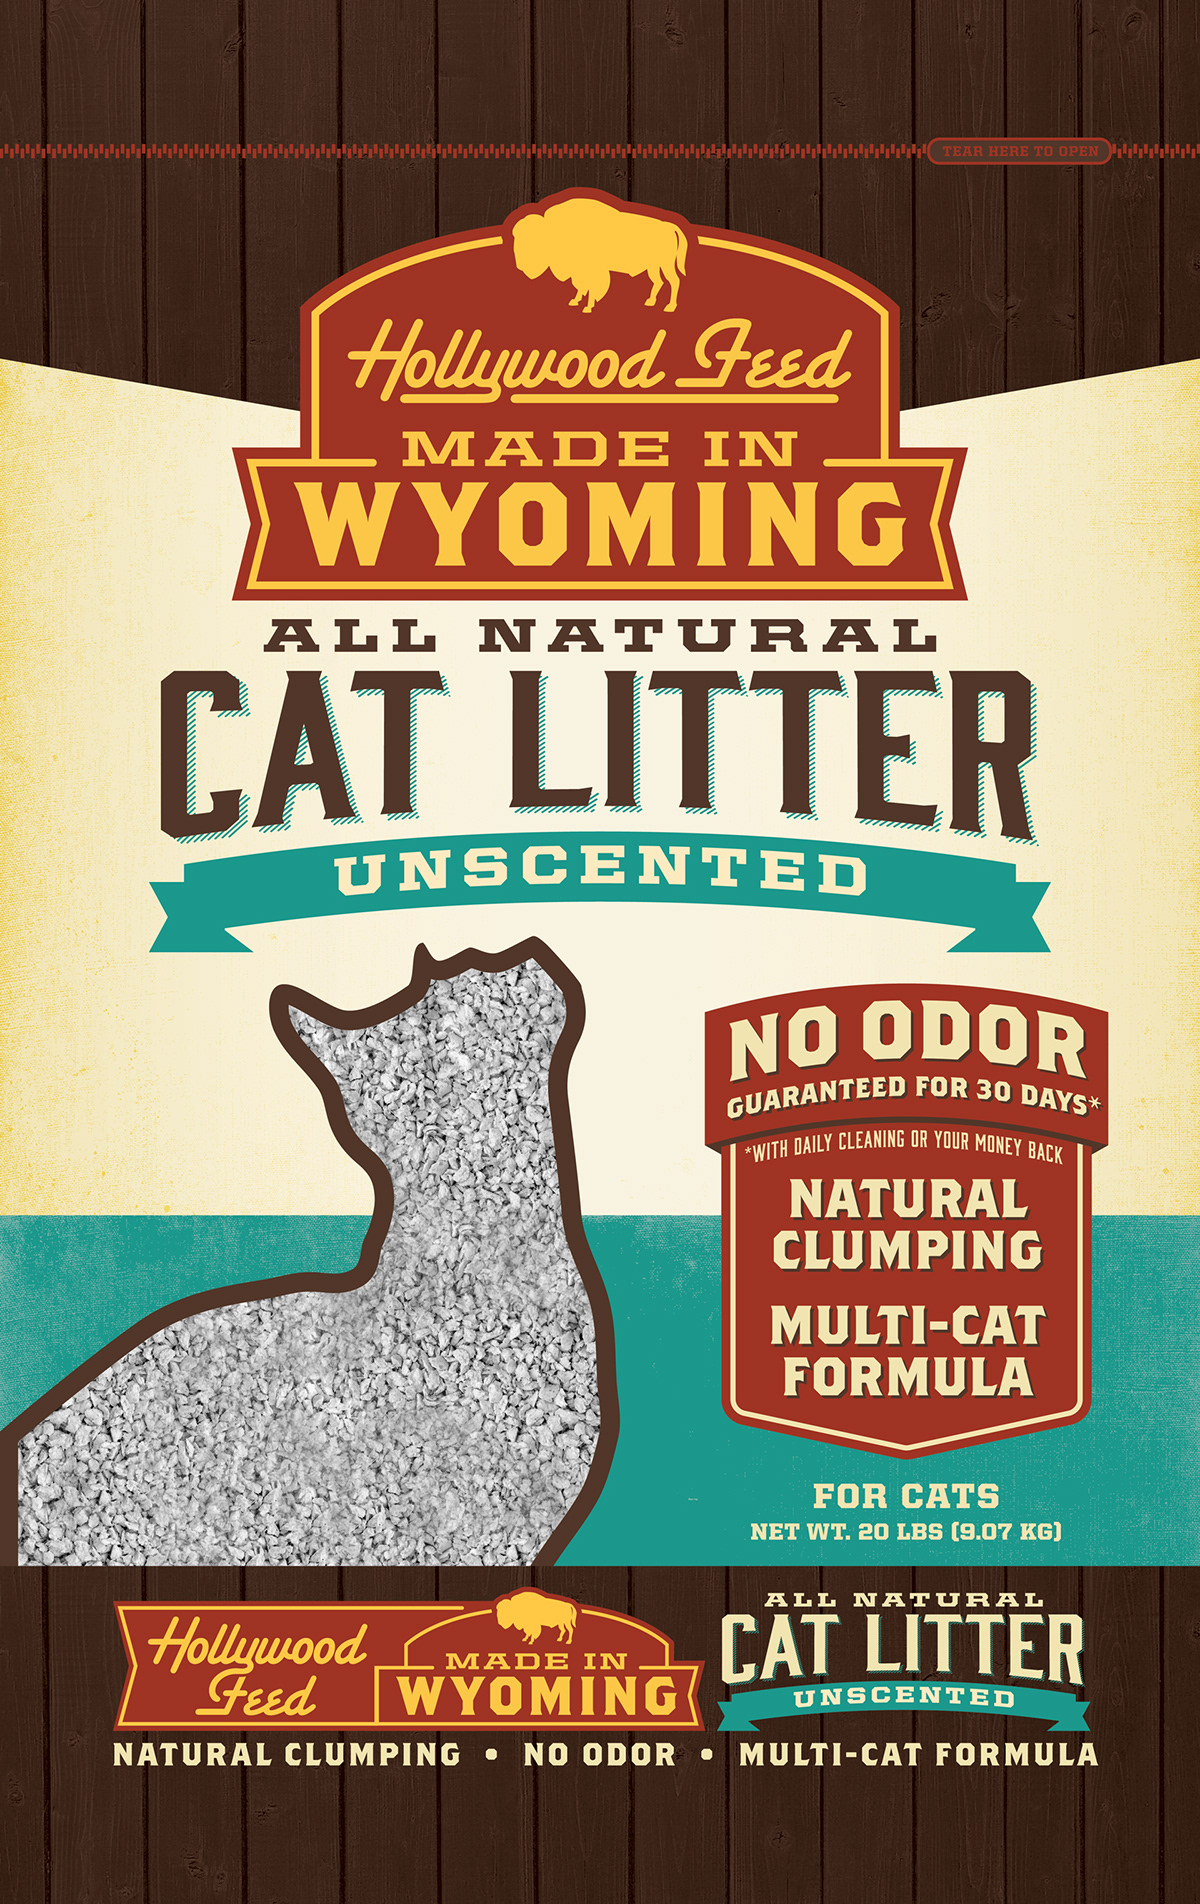 Hollywood Feed Cat Litter on Behance